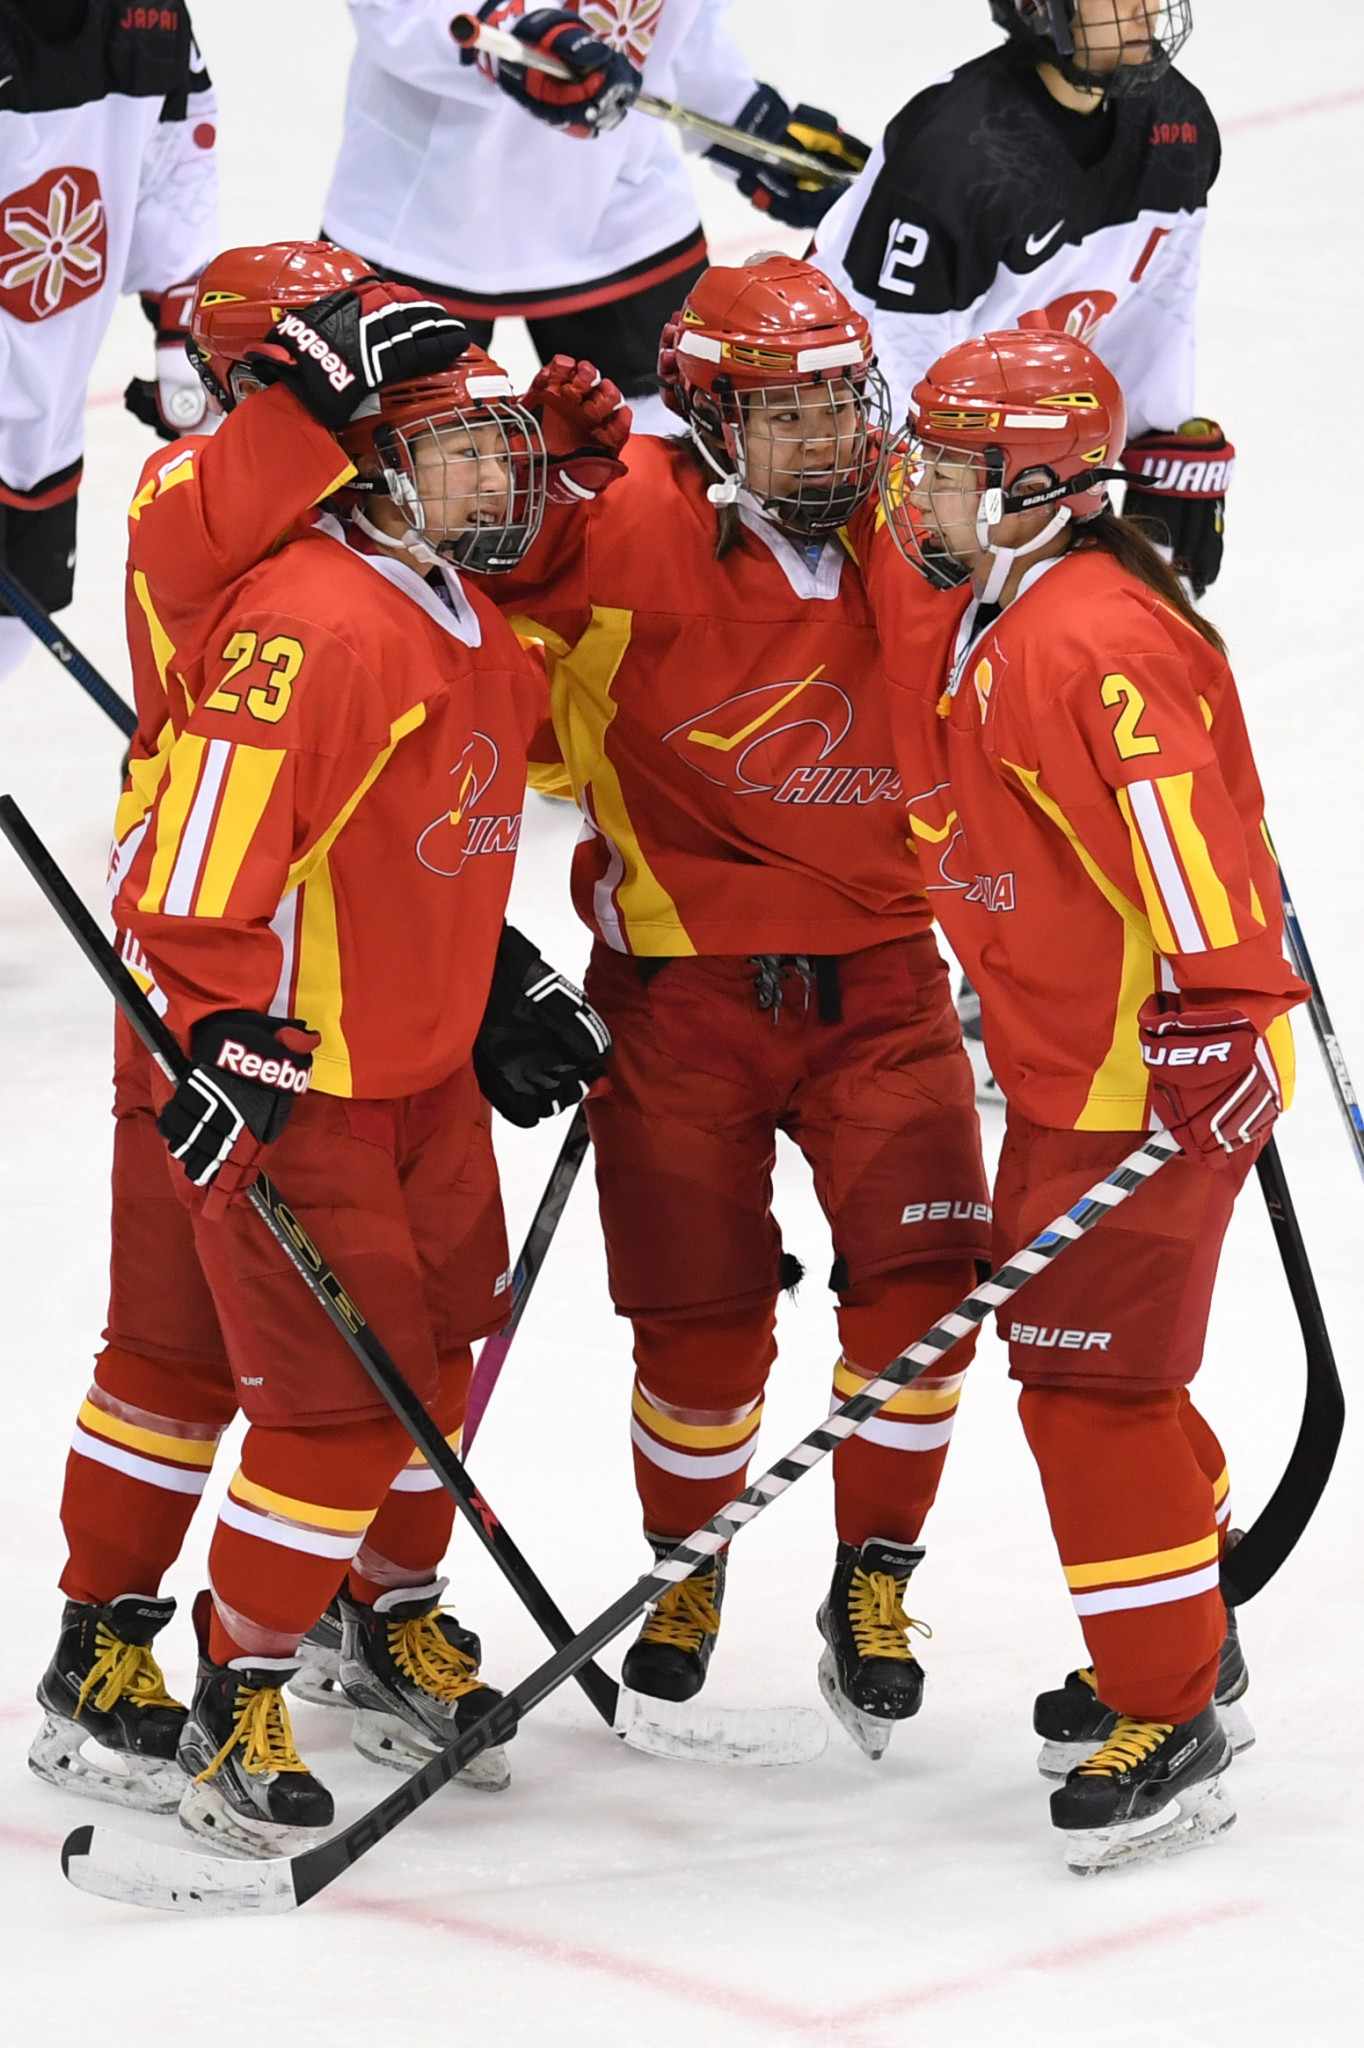 China is gearing up to host the Olympic ice hockey tournaments in 2022 ©Getty Images